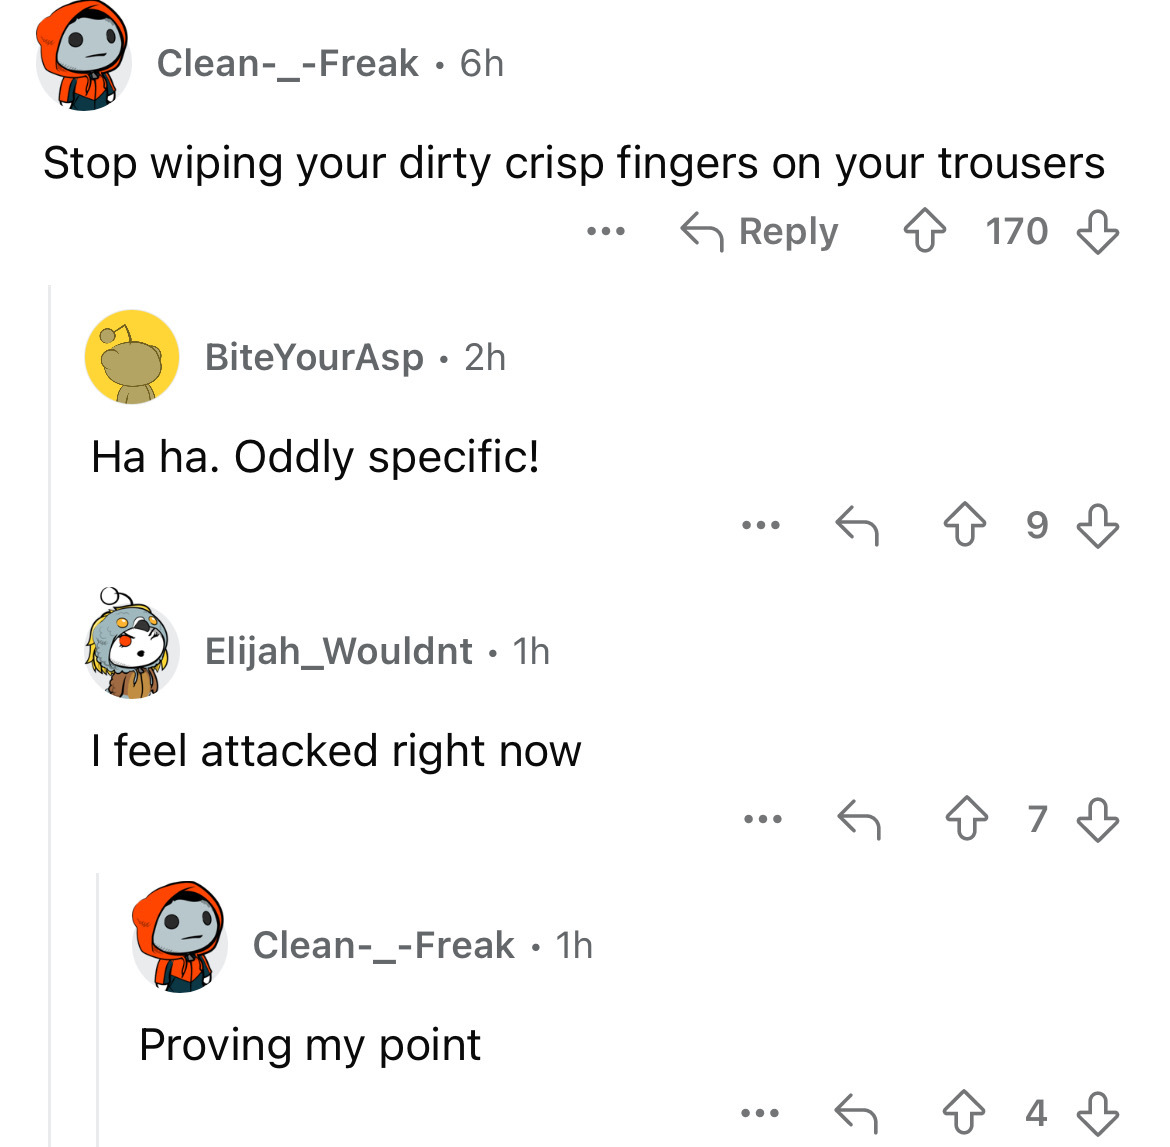 number - Clean_Freak 6h Stop wiping your dirty crisp fingers on your trousers BiteYourAsp 2h Ha ha. Oddly specific! Elijah Wouldnt 1h I feel attacked right now Clean_Freak 1h Proving my point ... 170 4